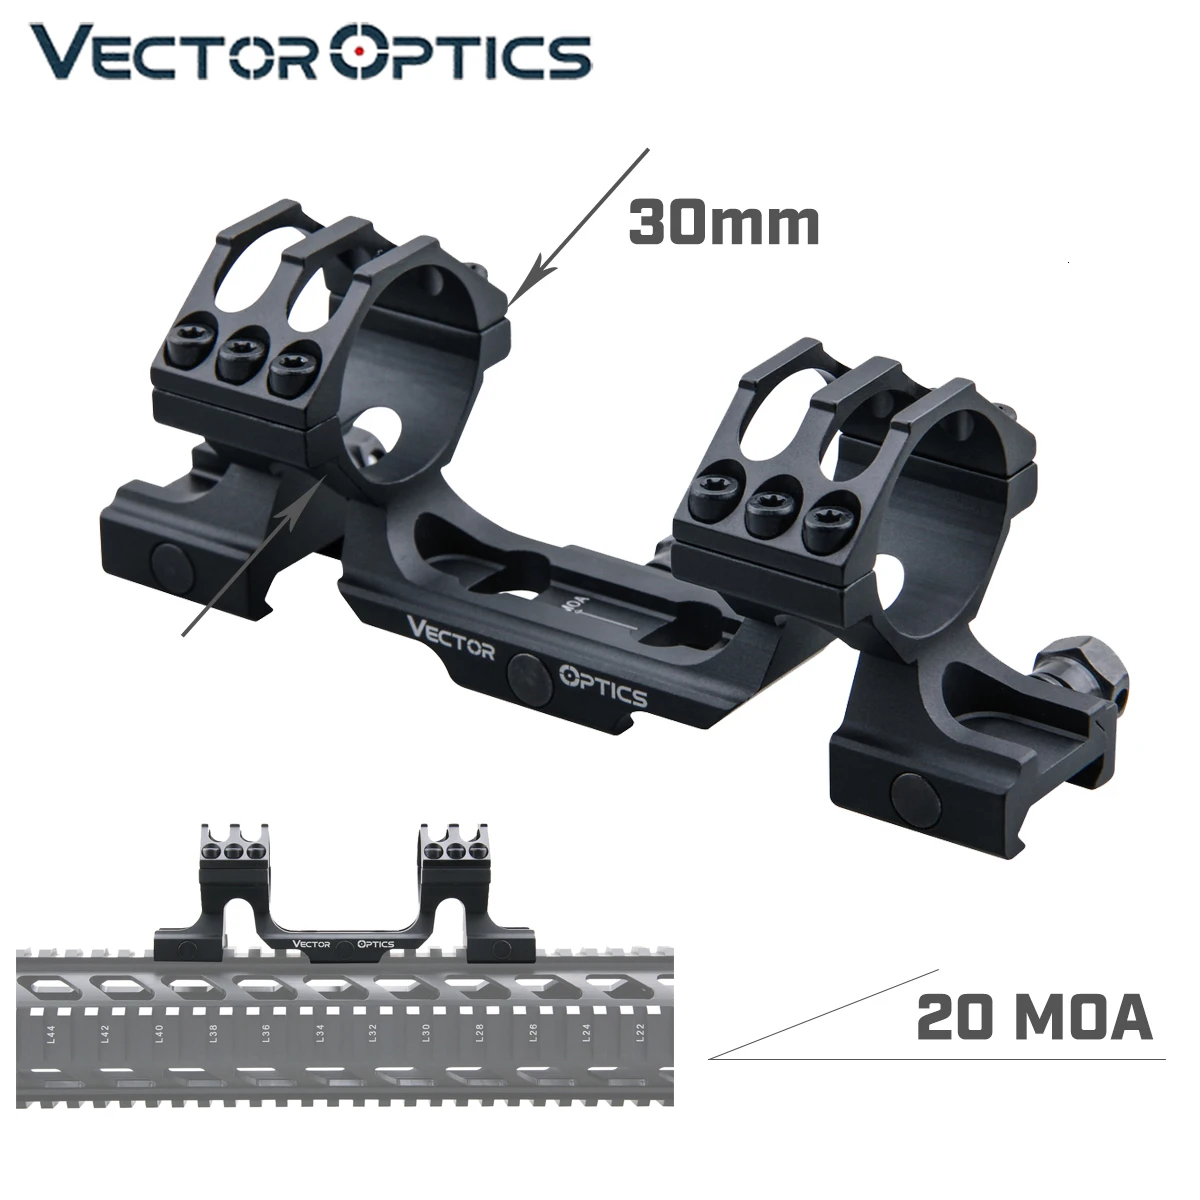 

Vector Optics 20 MOA One Piece Extended Scope Ring Mount Picatinny Rail Fit 30mm Riflescope Long Range Shooting Air Rifle Airgun